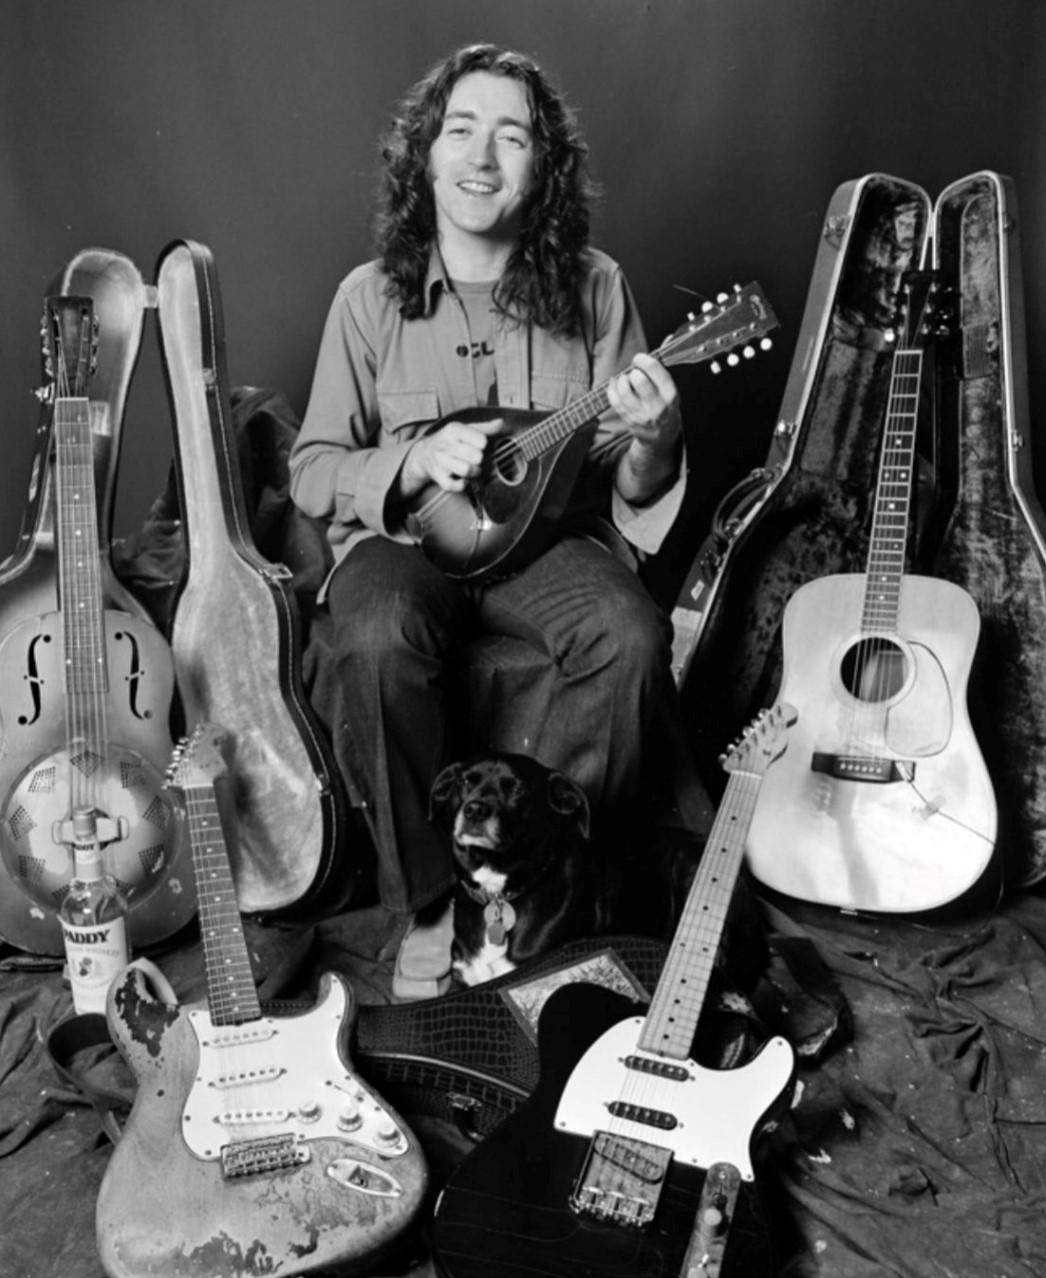 A man sitting with guitars in the background